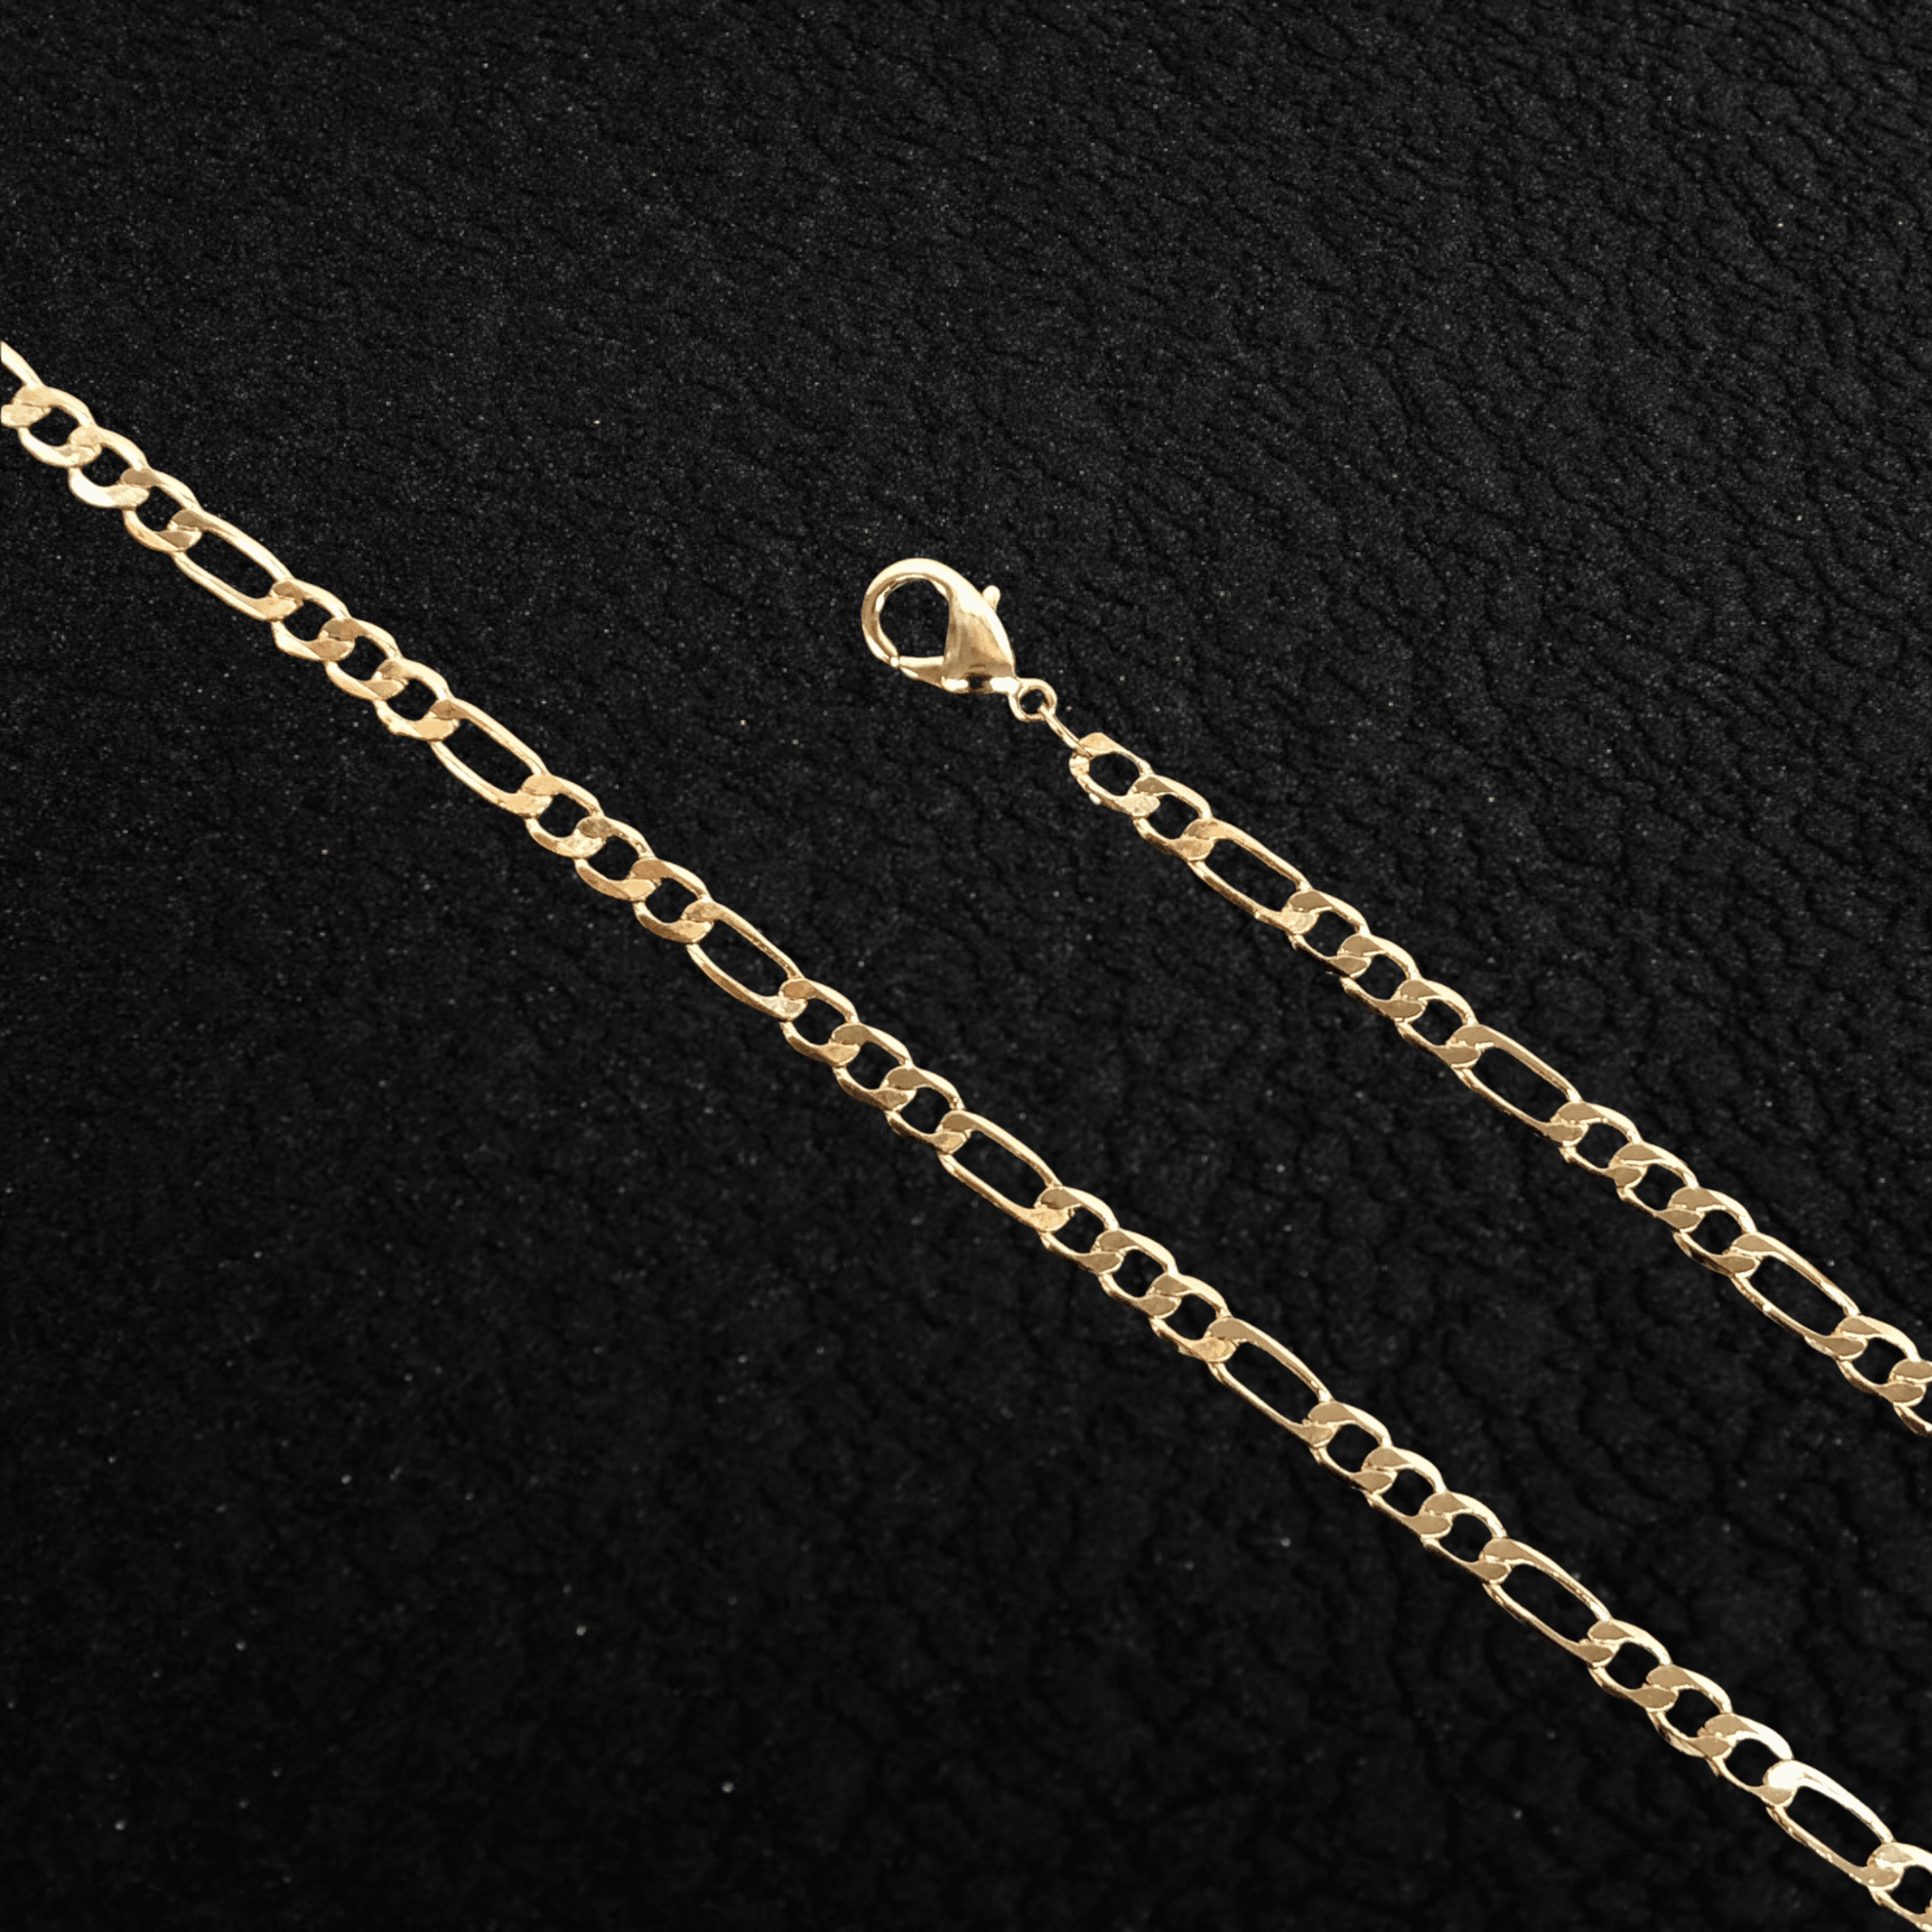 18K Gold Filled 3mm Figaro Chain (Pack of 12) -18K Gold Filled Oro Laminado CHAIN, NEW - KUANIA